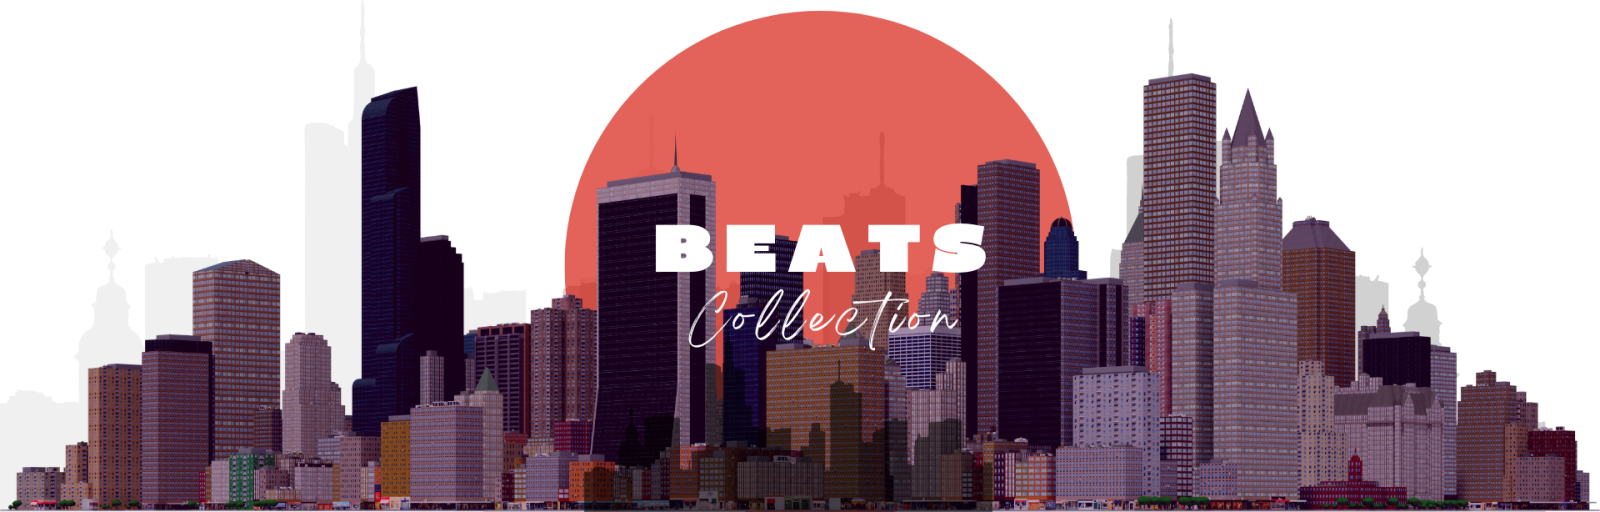 Beats Collection